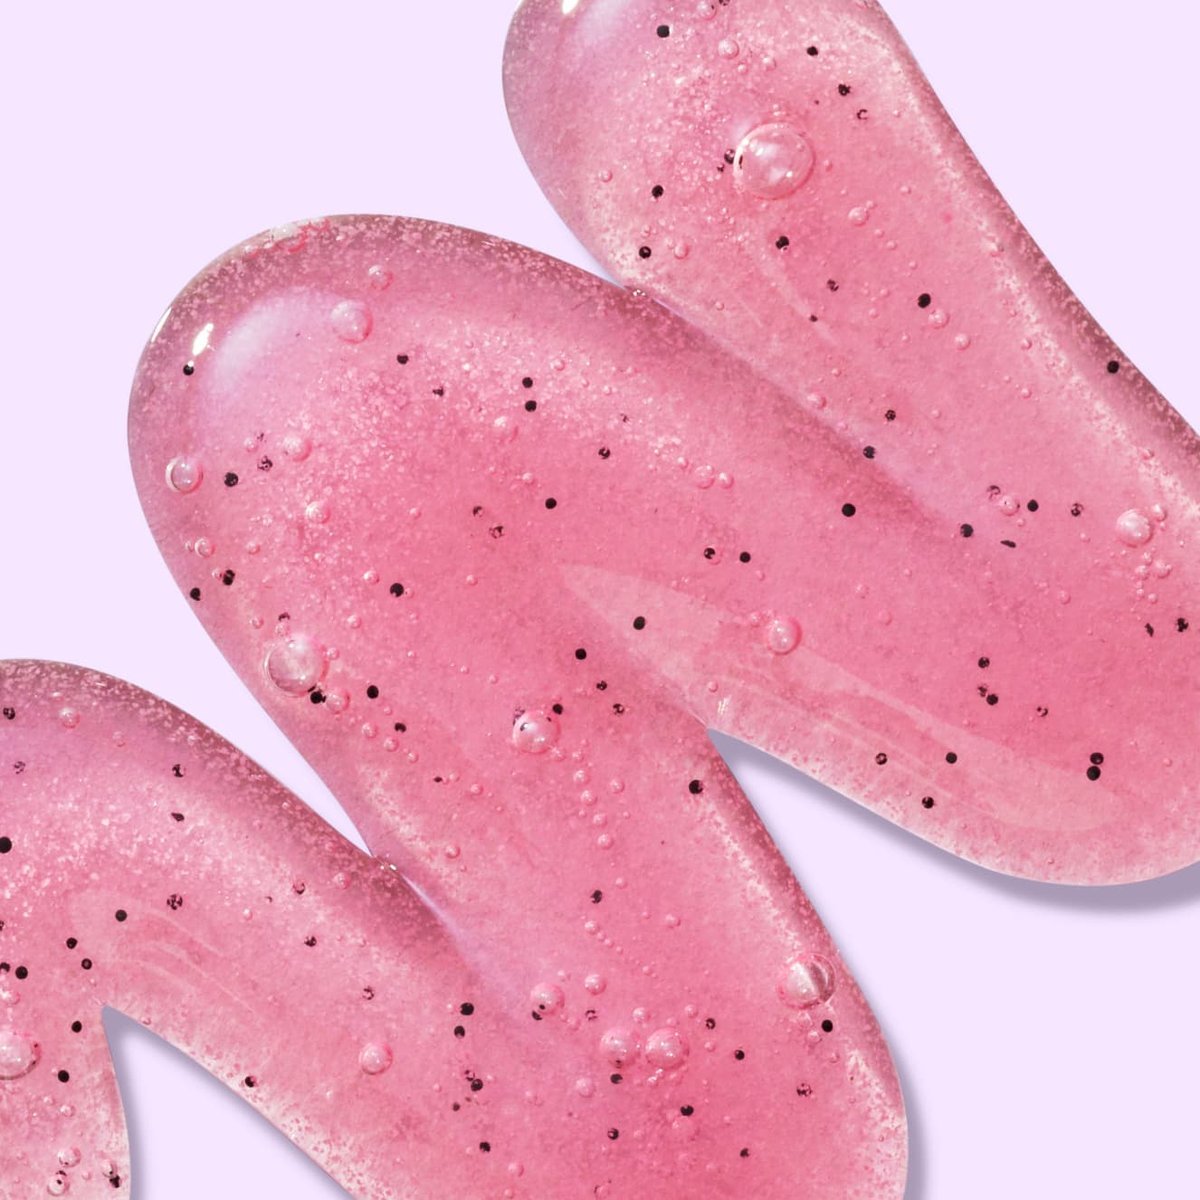 Bright pink gel with black beads and bubbles in front of light pink background